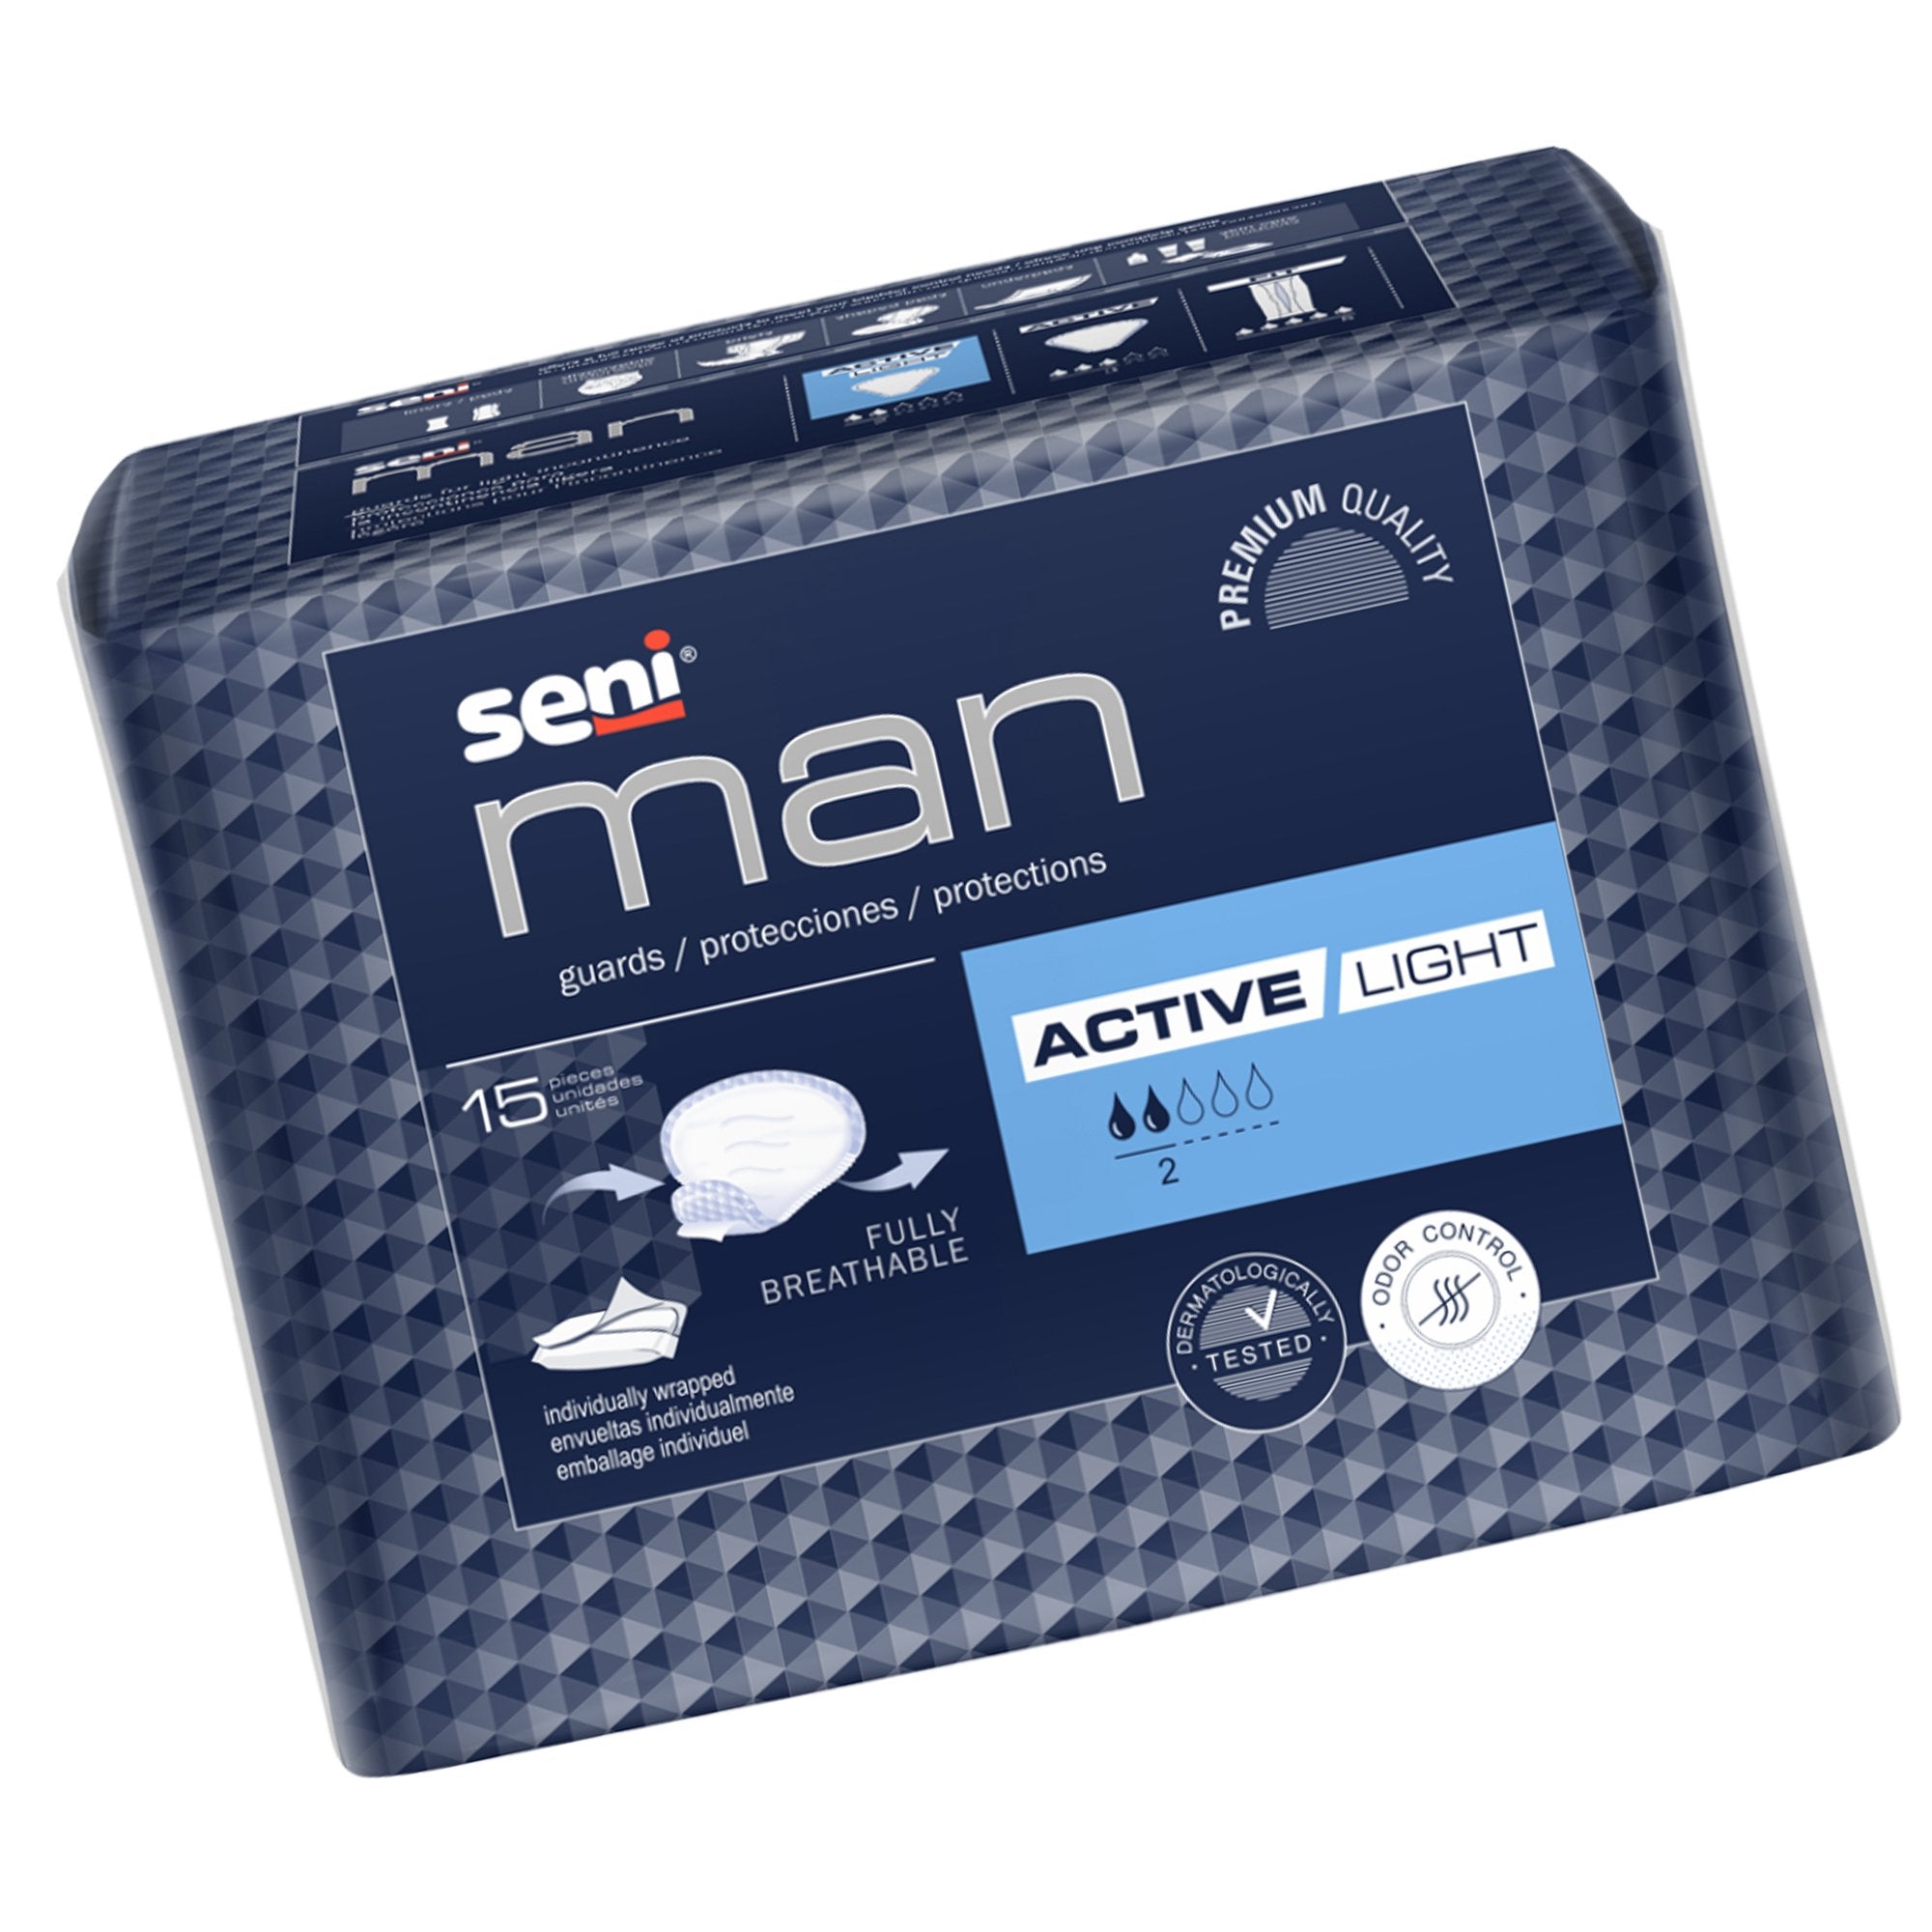 Bladder Control Pad Seni® Man Active Light 7-1/2 X 9-3/10 Inch Light Absorbency Superabsorbant Core One Size Fits Most